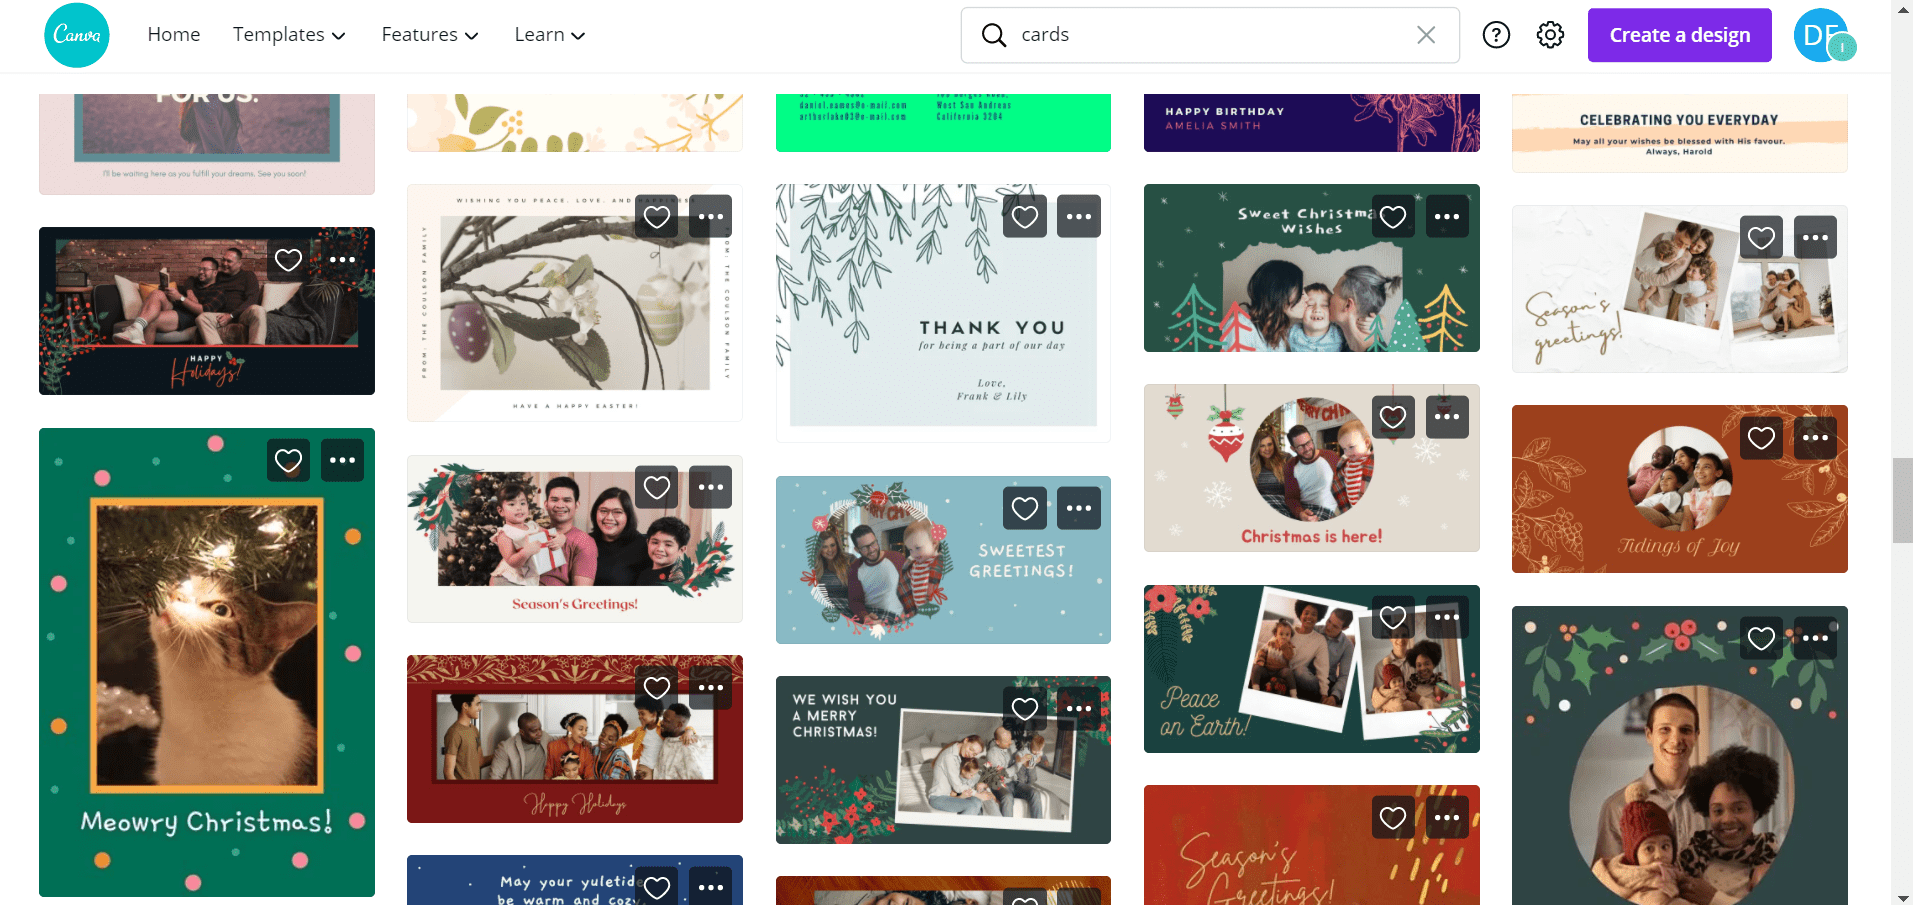 snapshot of canva card templates for virtual money gift ideas